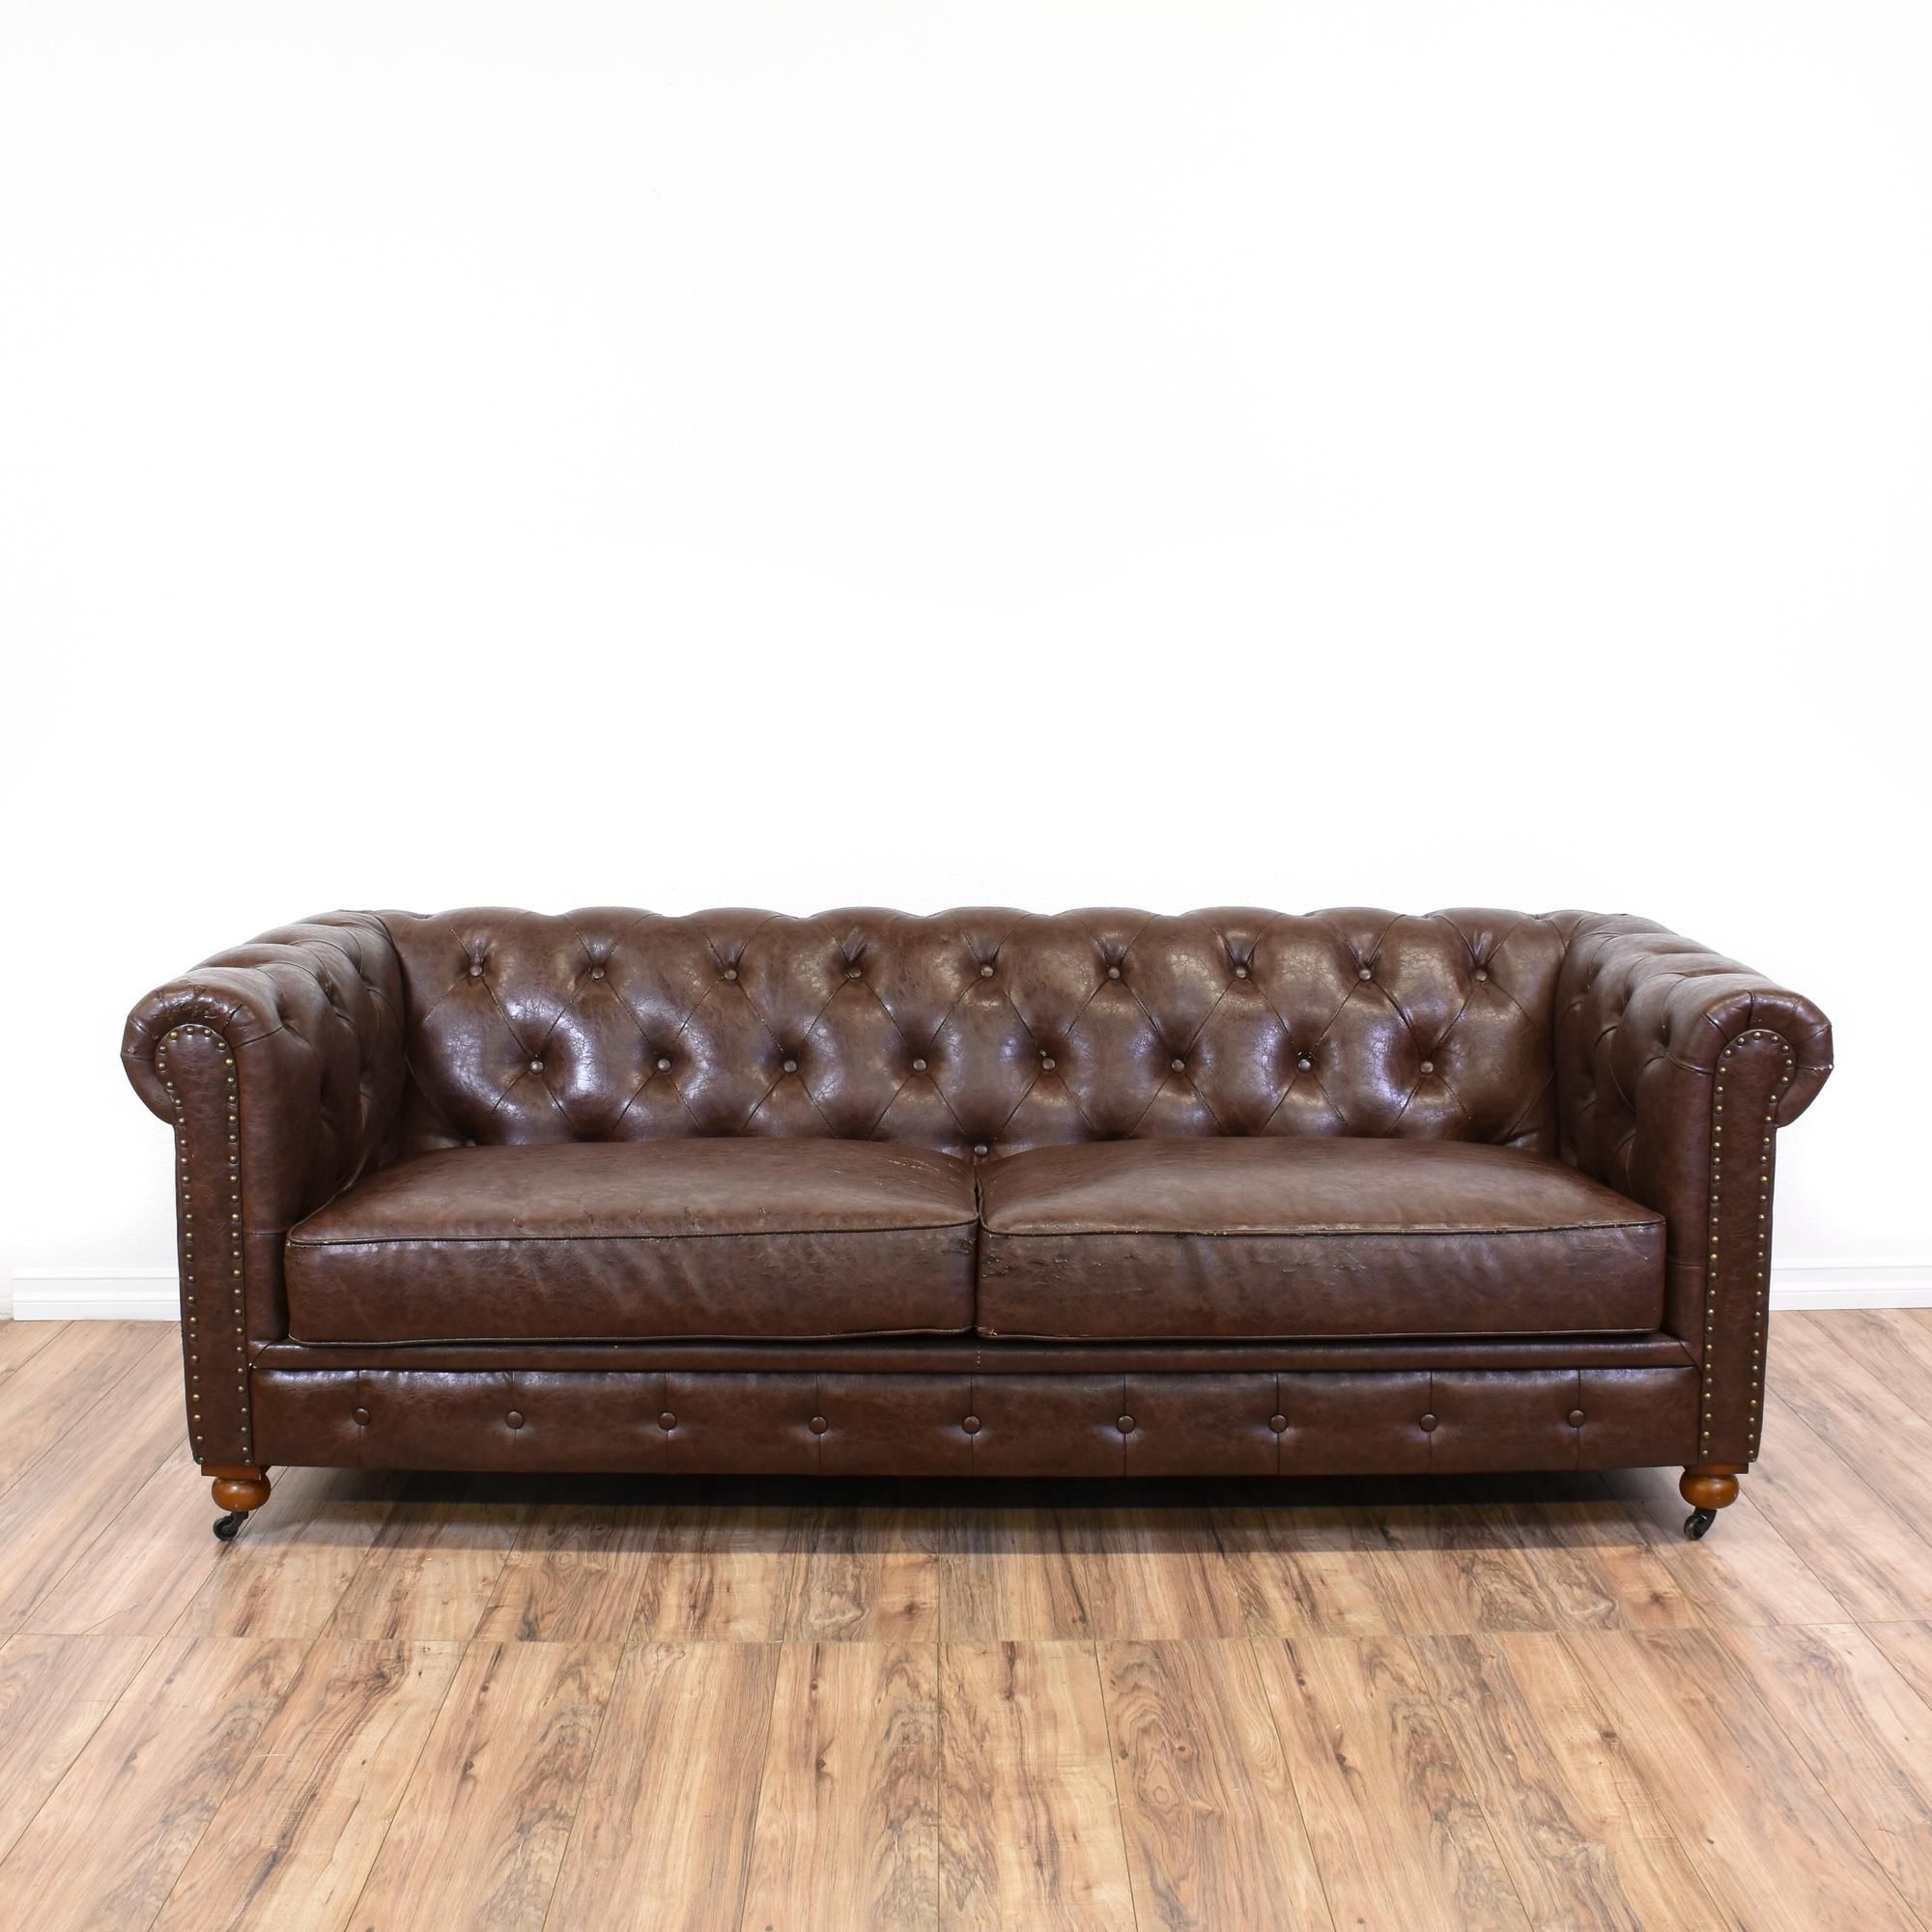 This Chesterfield Sofa Is Upholstered In A Faux Brown Leather With A With Recent Faux Leather Sofas In Dark Brown (View 10 of 15)